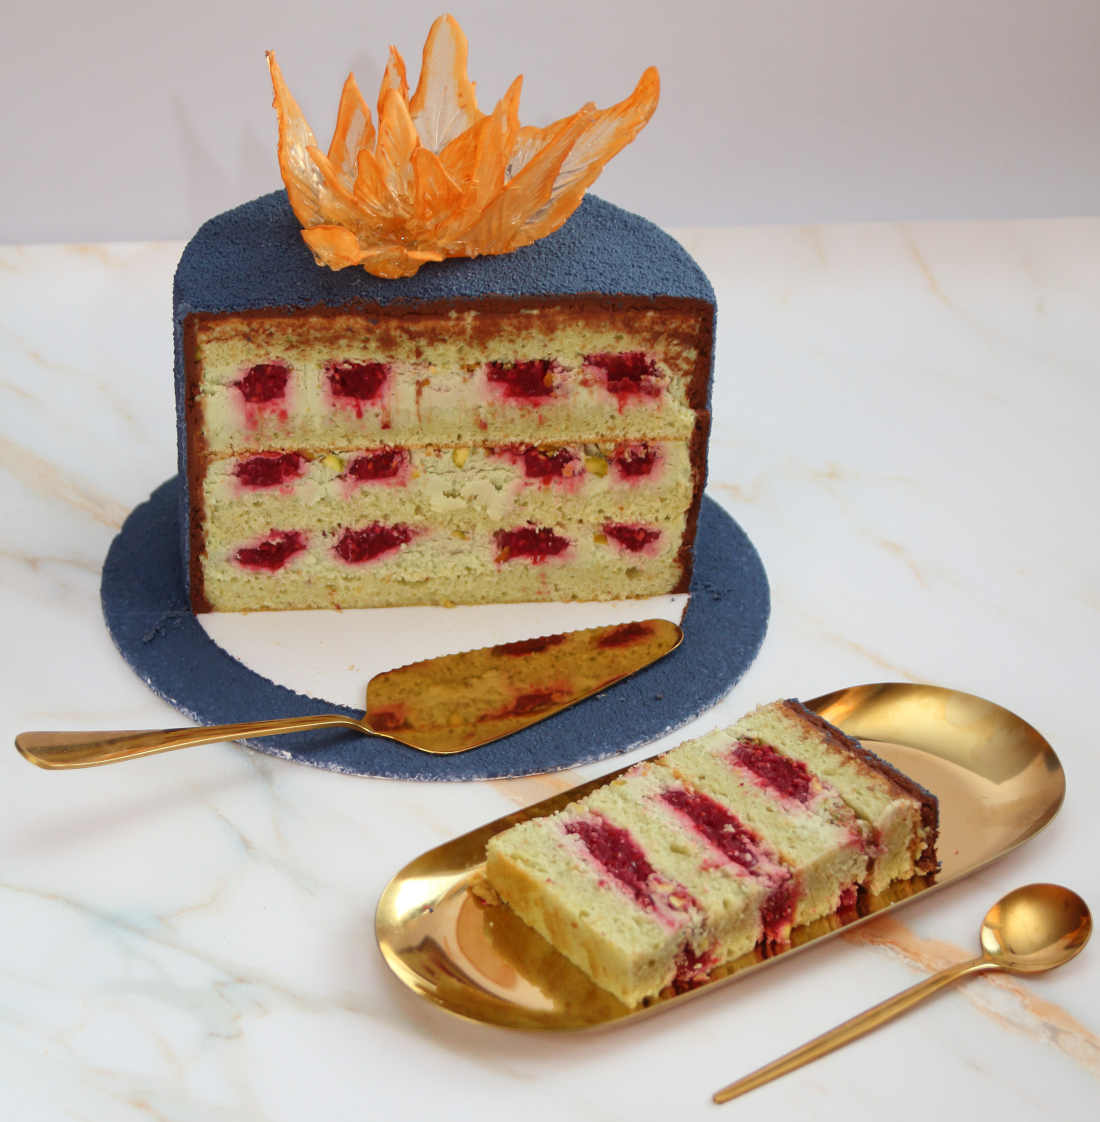 Slice the cake with raspberry and pistachio filling